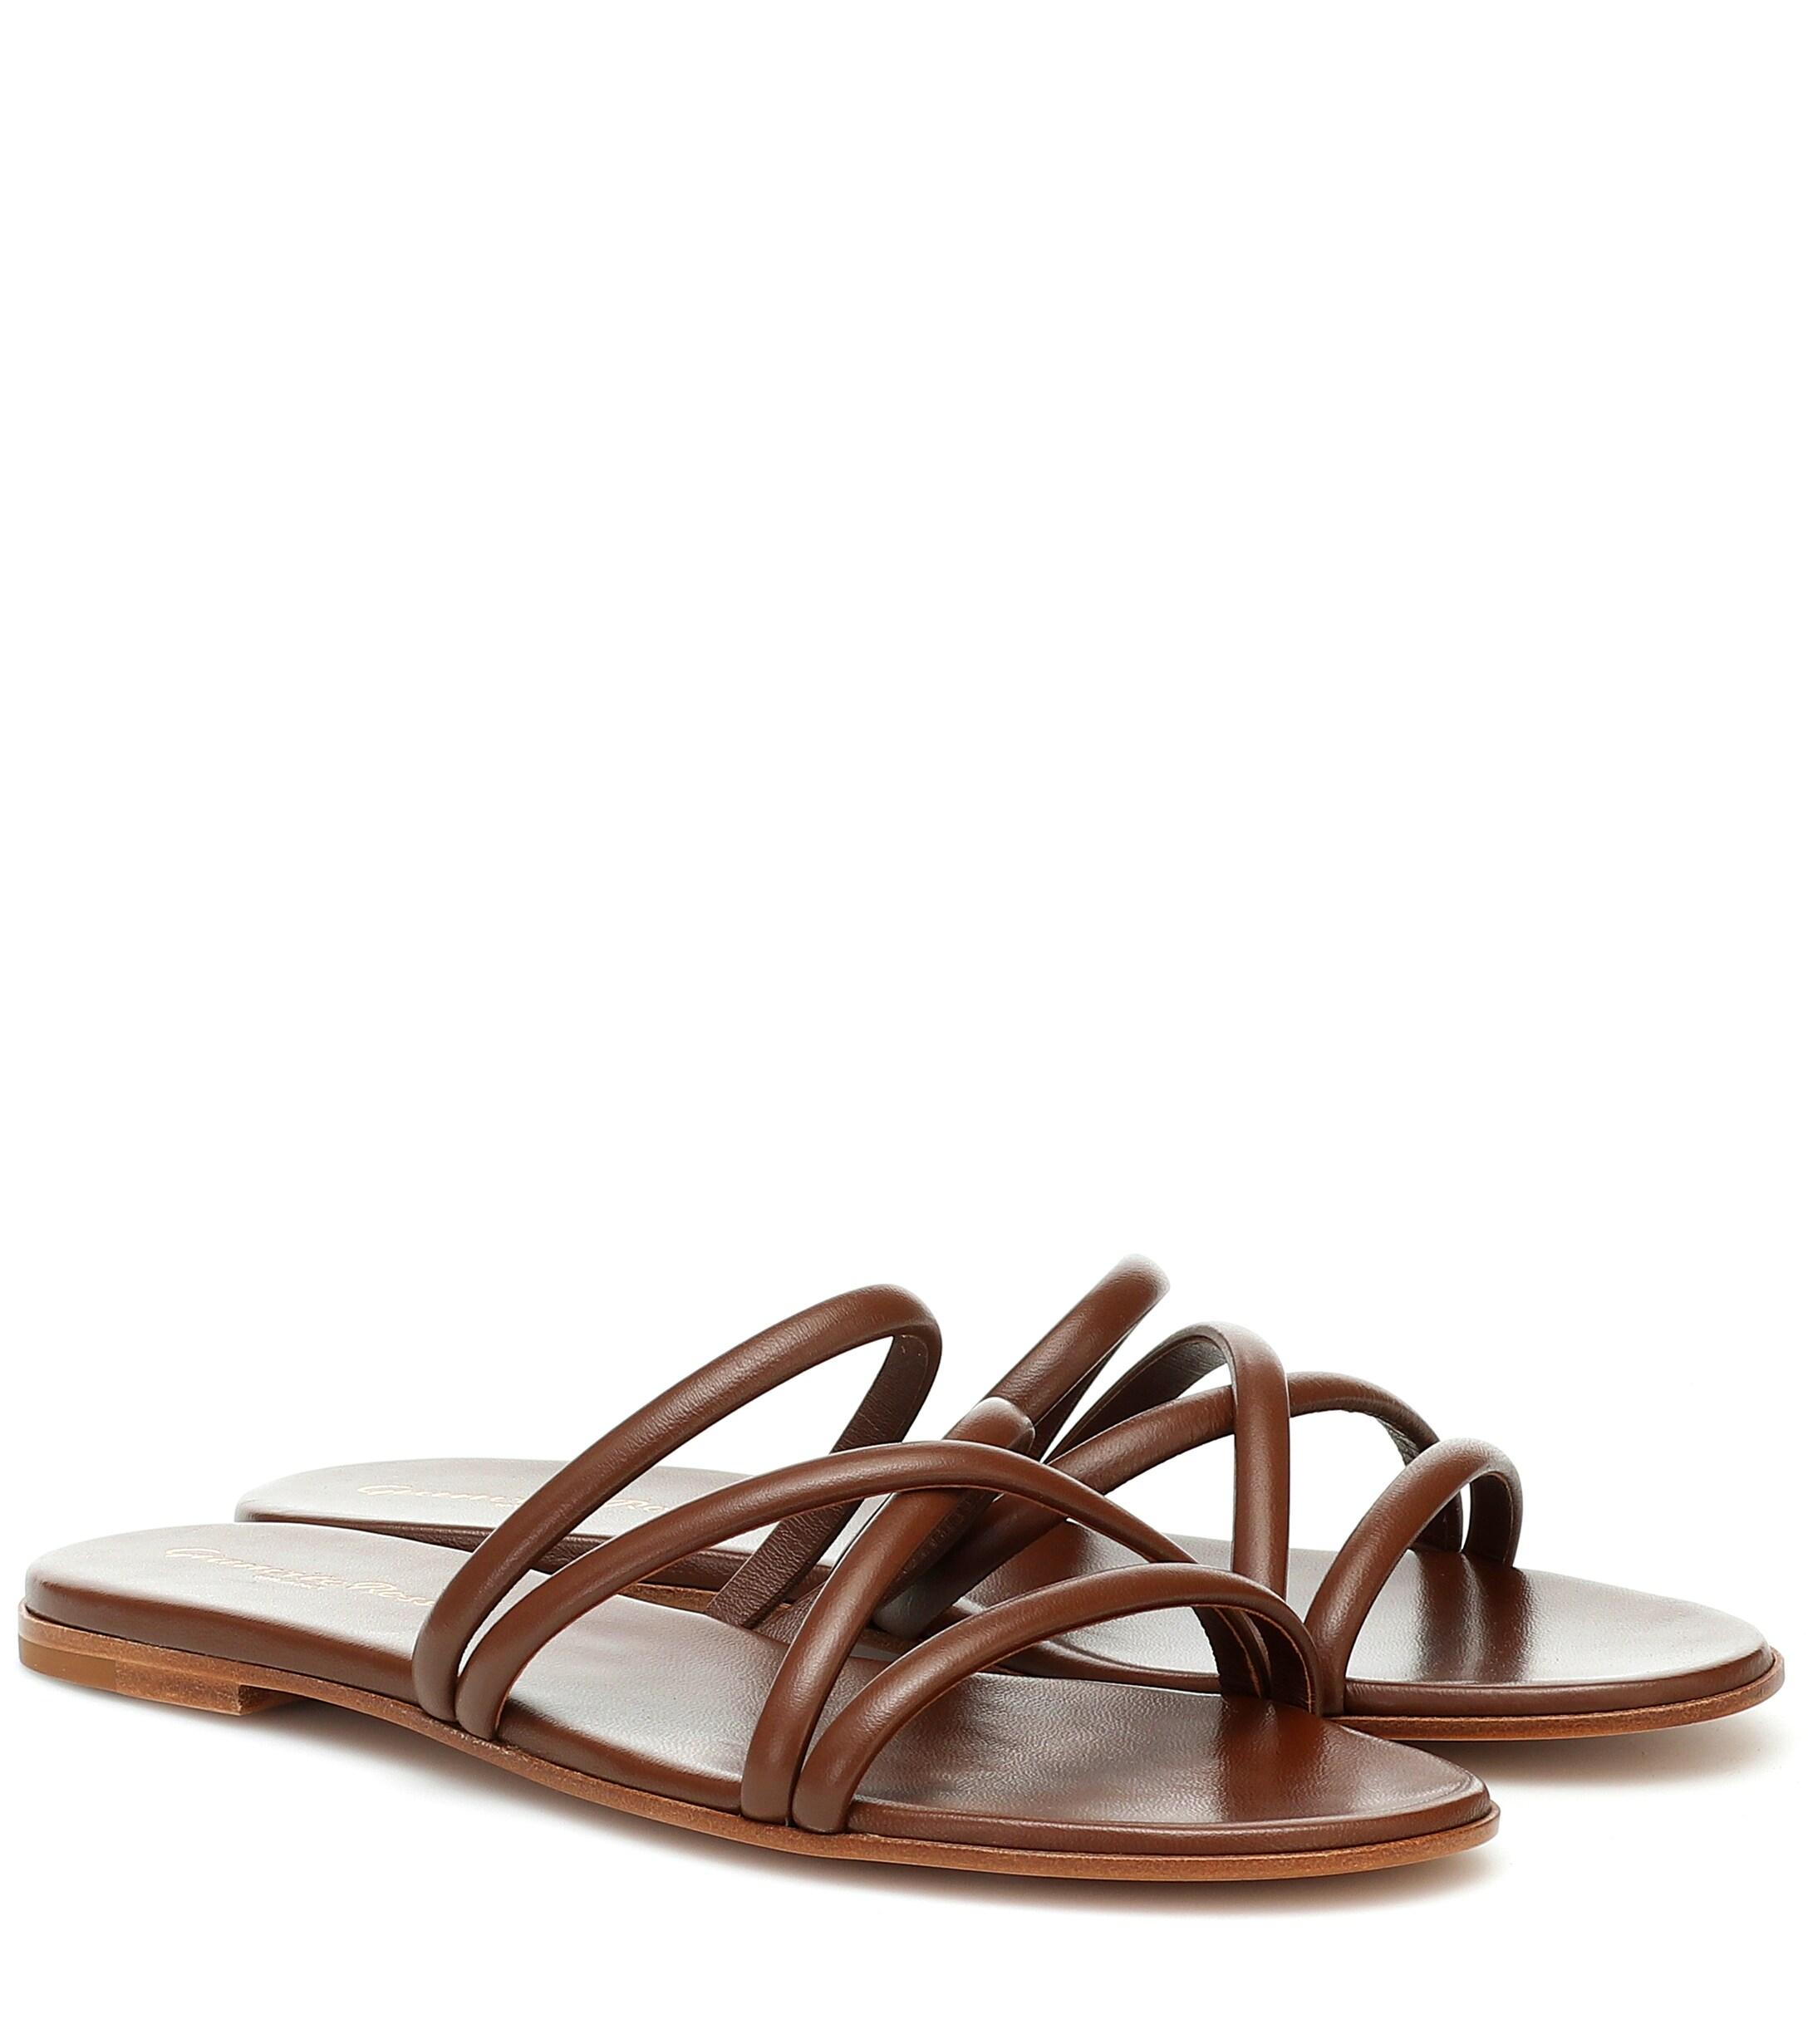 Gianvito Rossi Leather Sandals in Brown - Lyst